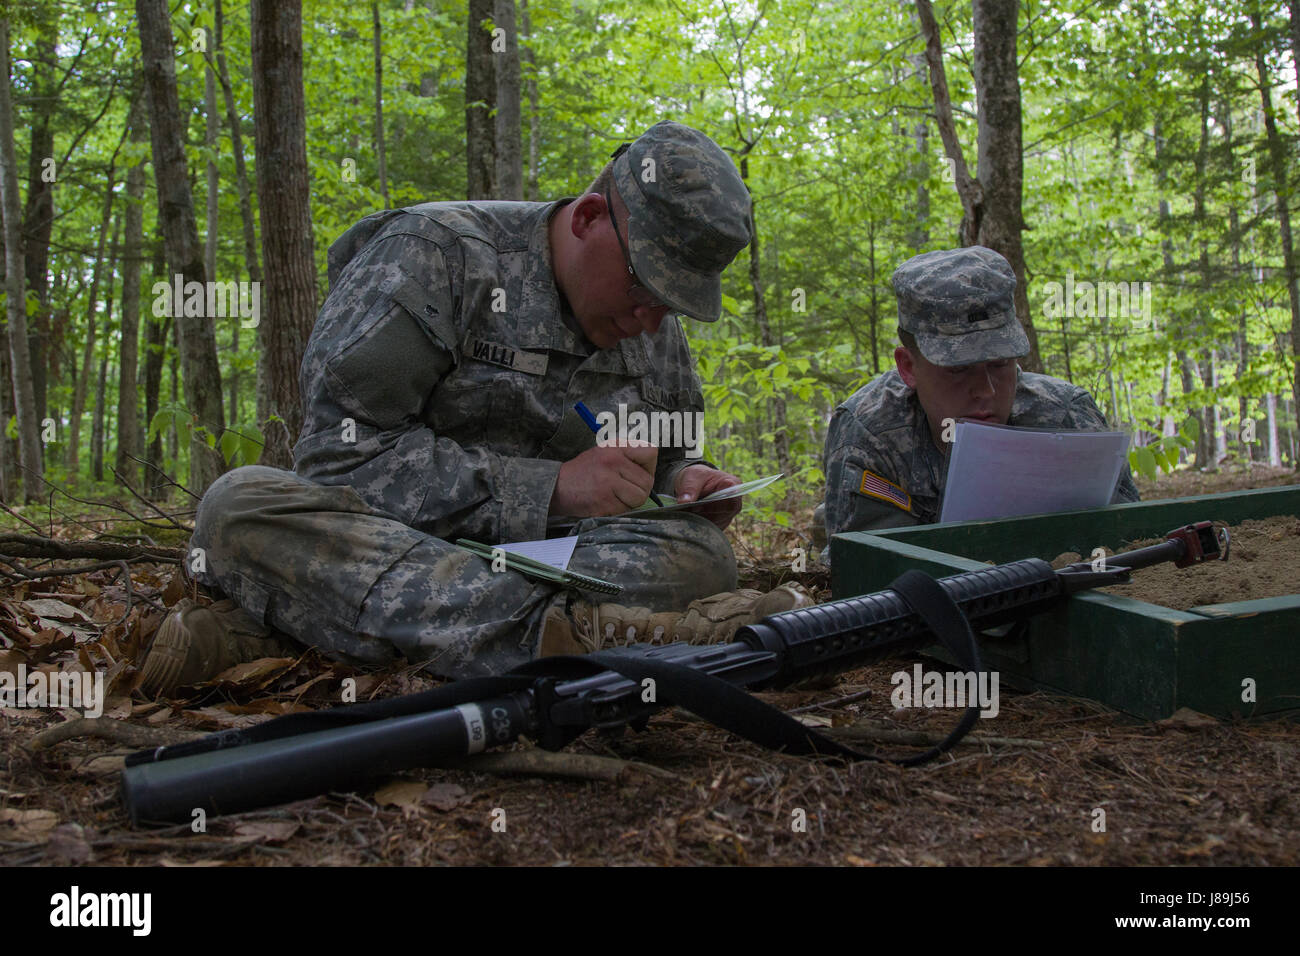 U.S. Army officer candidates plan their mission during a reconnaissance operations lane at New Hampshire National Guard Training Site in Center Strafford, Nh., May 19, 2017. Soldiers from Connecticut, Maine, Massachusetts, New Hampshire, New Jersey, New York, Rhode Island, and Vermont participated in the Officer Candidate School Field Leadership Exercise in preparation for graduation and commission. (U.S. Army National Guard photo by Spc. Avery Cunningham) Stock Photo